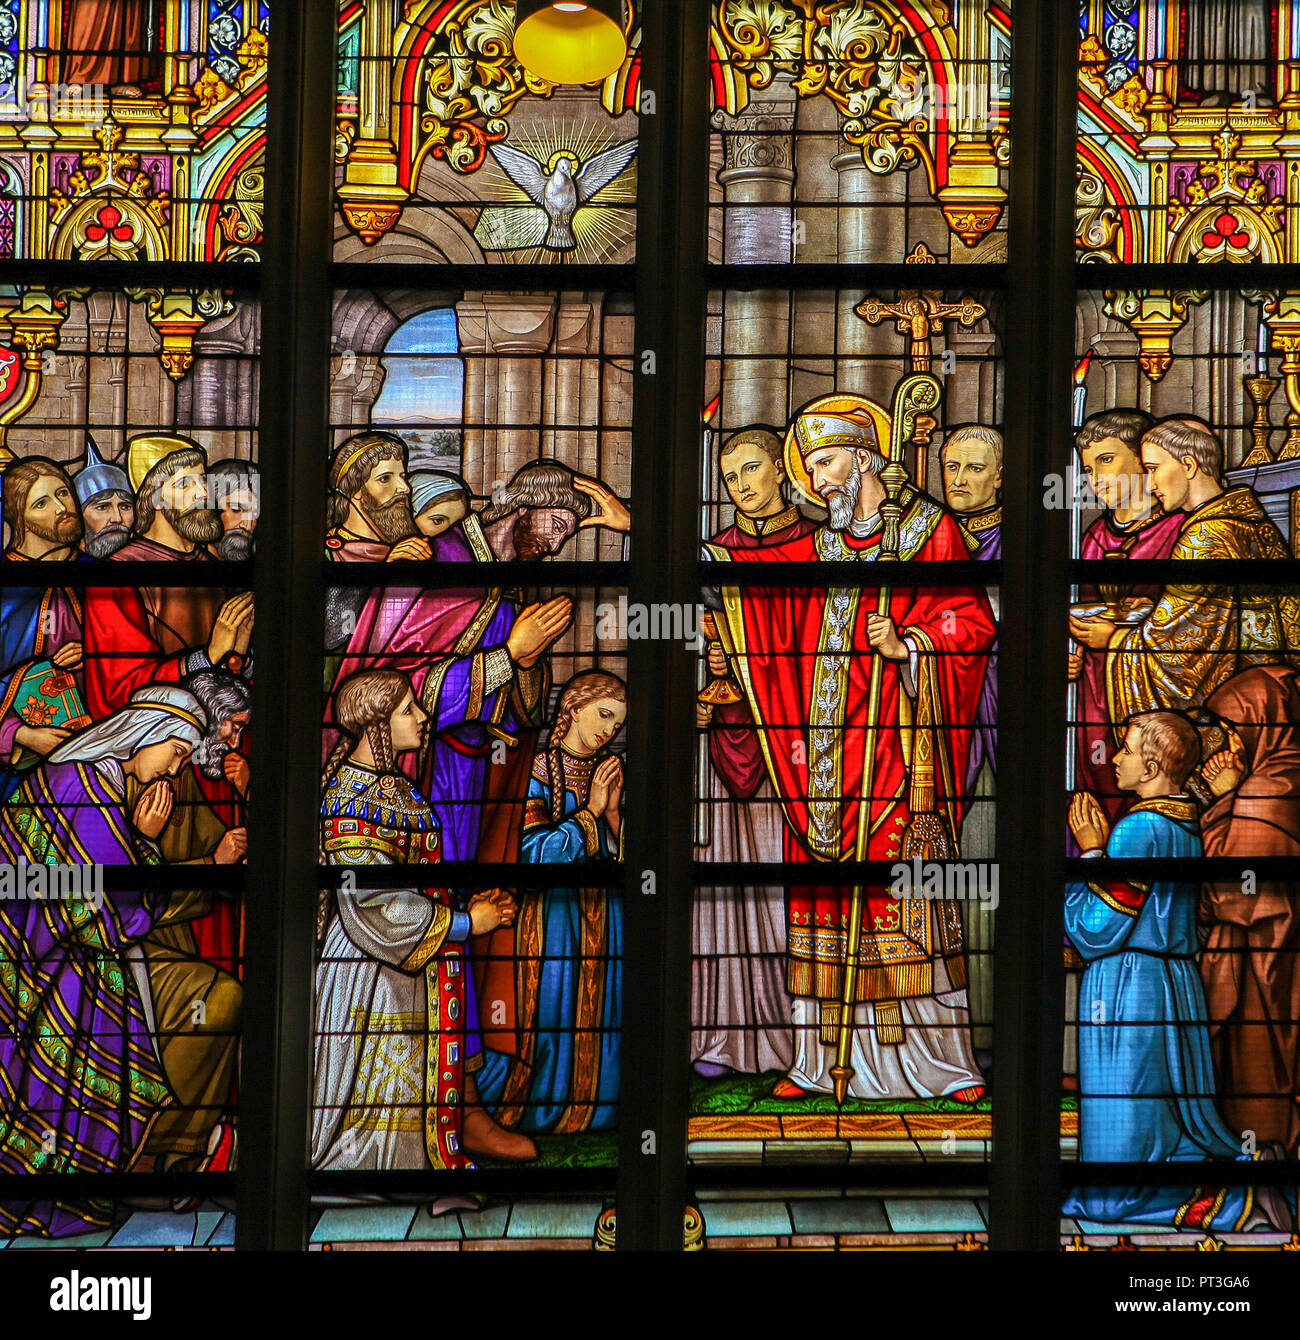 Stained Glass in Den Bosch Cathedral depicting Saint Lambertus anointing the Taxandrians during the Confirmation, the rite of initiation in the Cathol Stock Photo